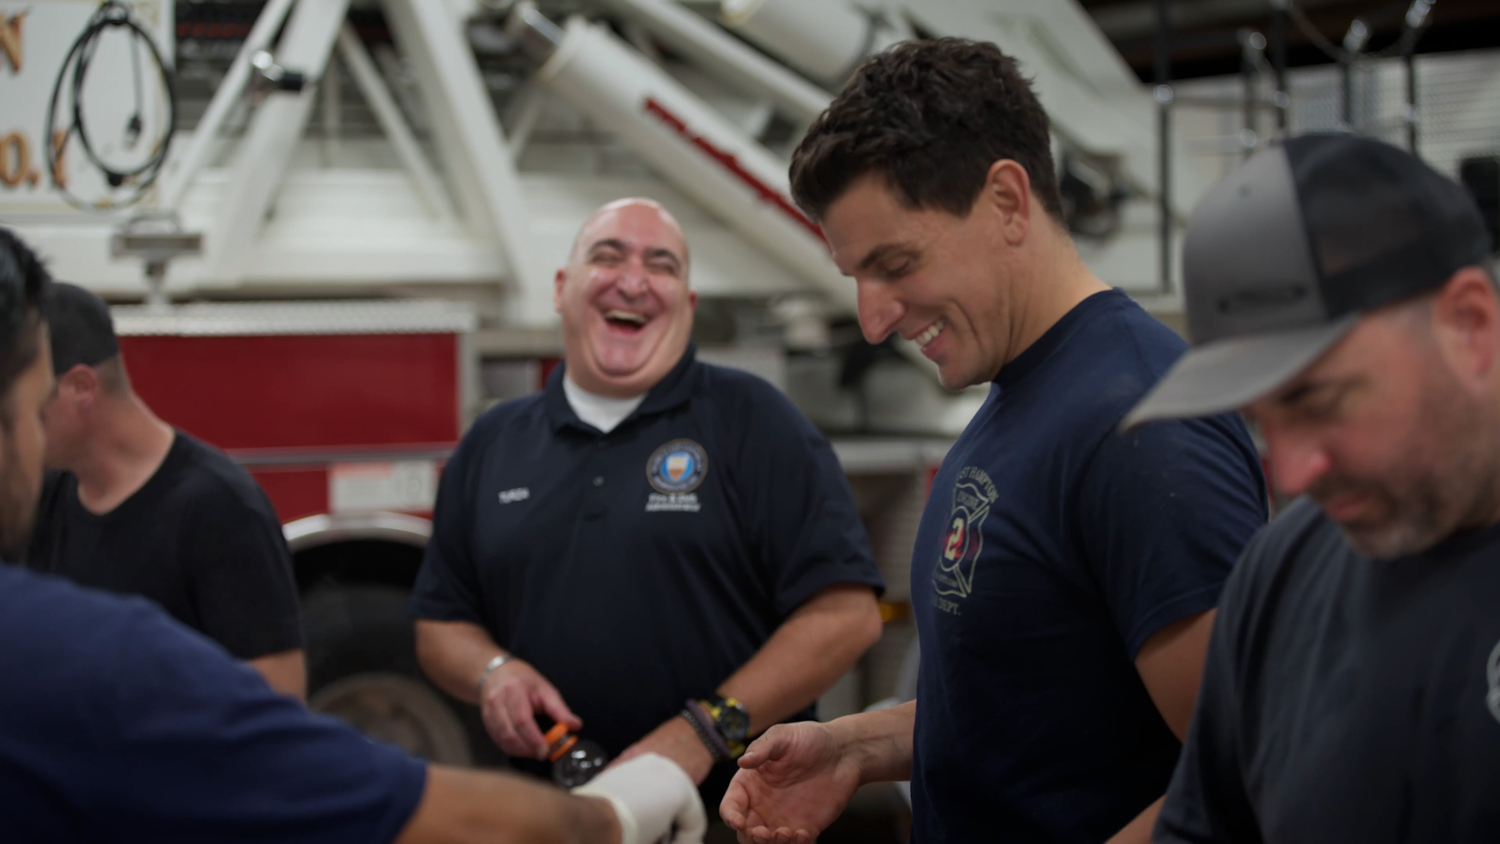 East Hampton Fire Department volunteer Brian Stanis and Emergency Services Administrator Gerry Turza in a recruitment video produced by the village to attract new volunteers.